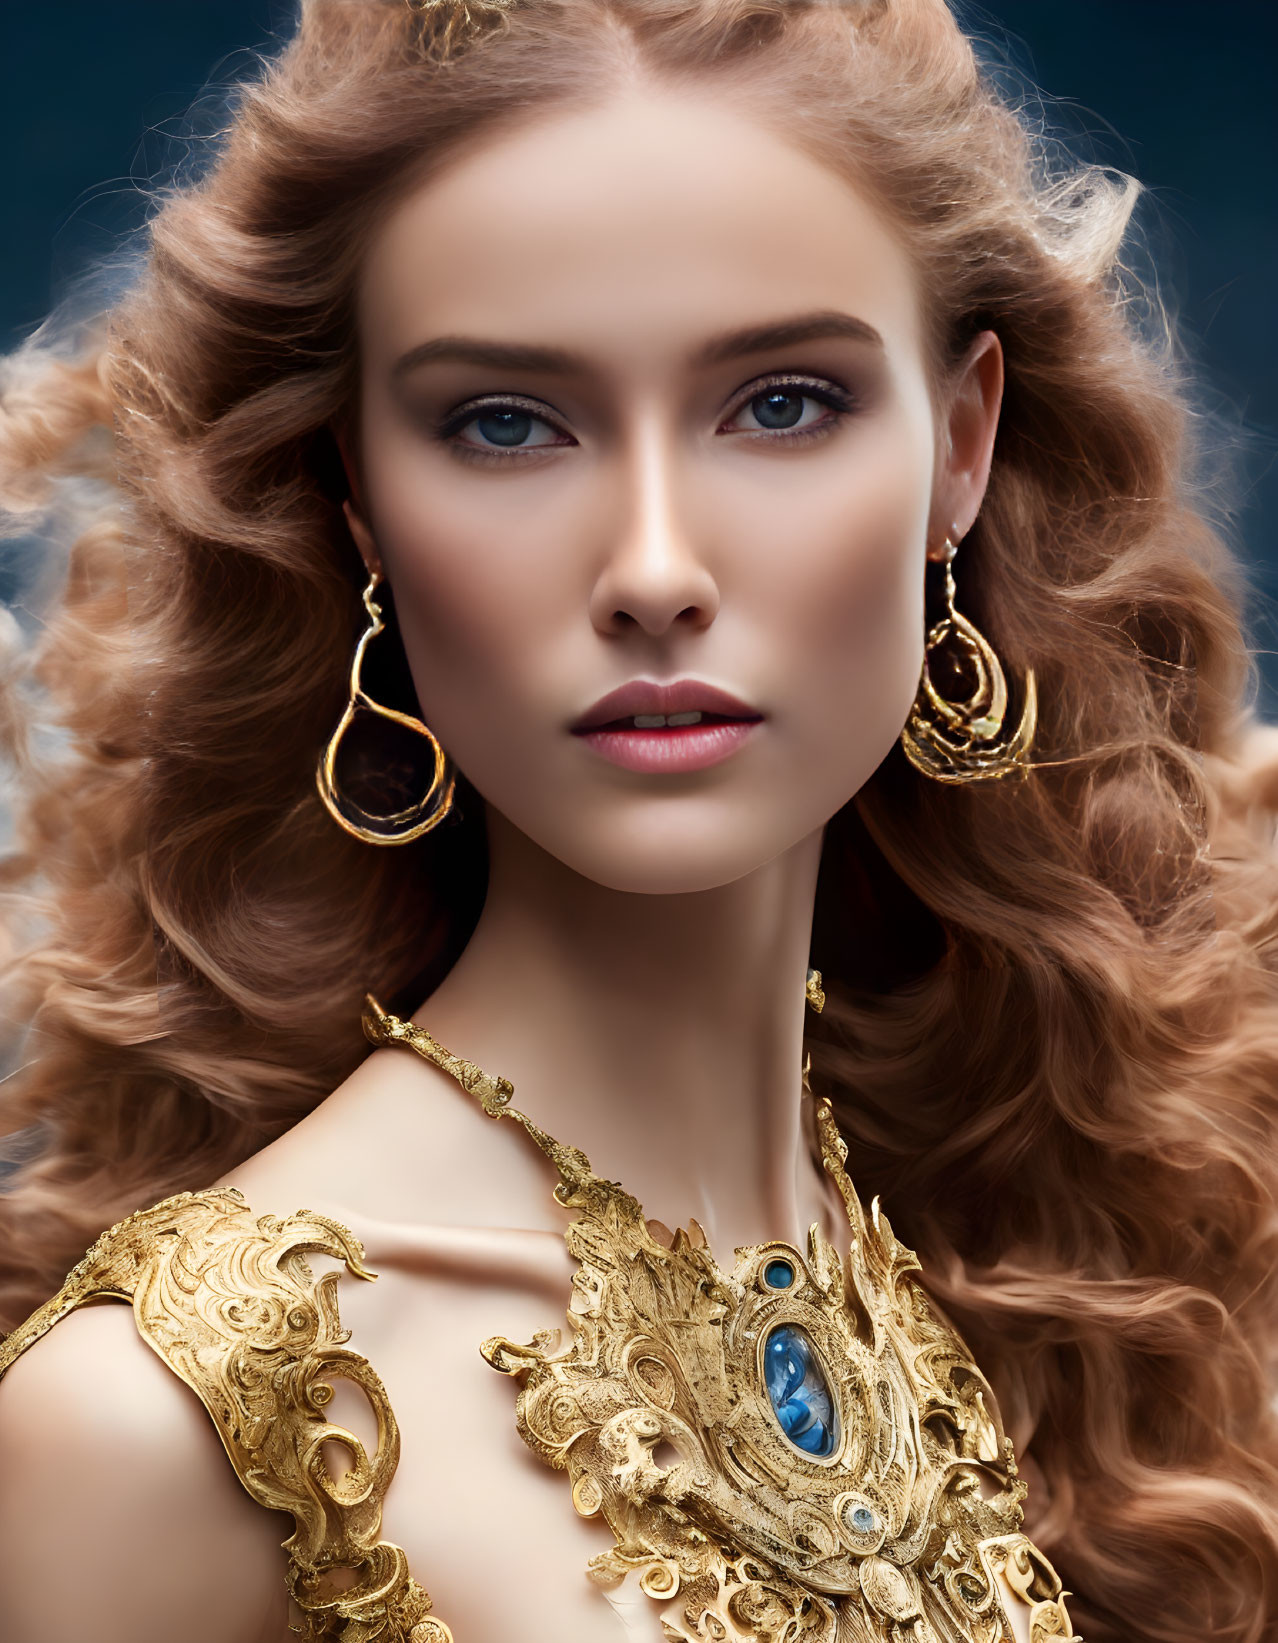 Portrait of woman with curly hair, blue eyes, and golden jewelry on blue background